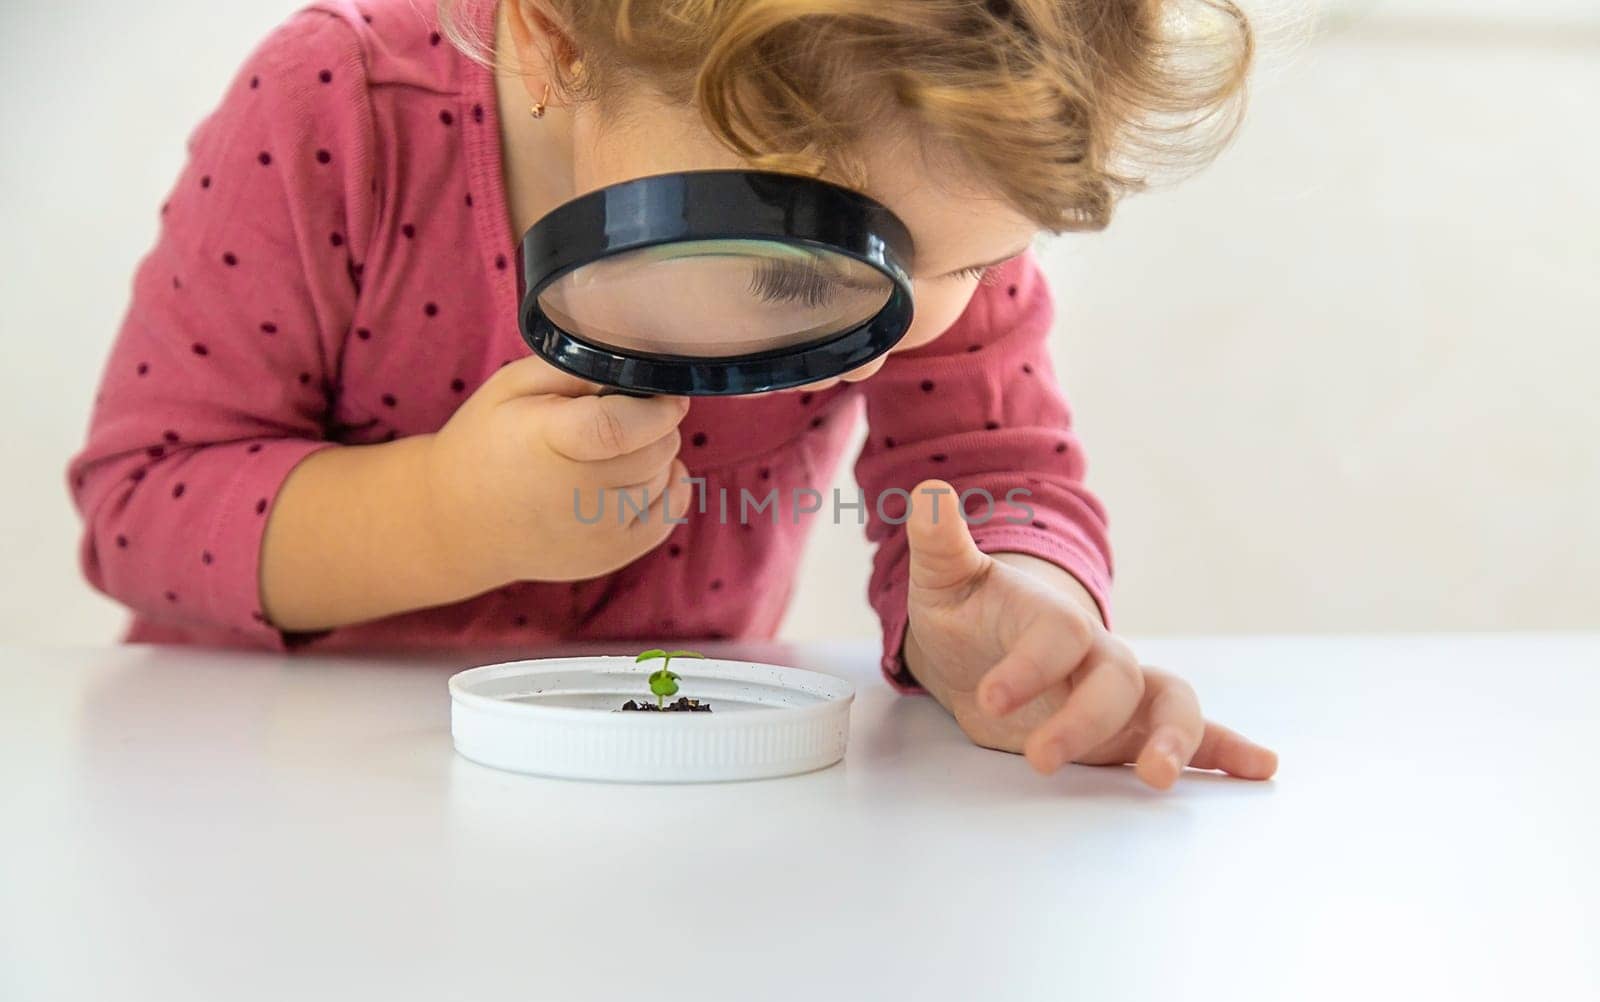 A child examines a plant under a magnifying glass. Selective focus. Kid.